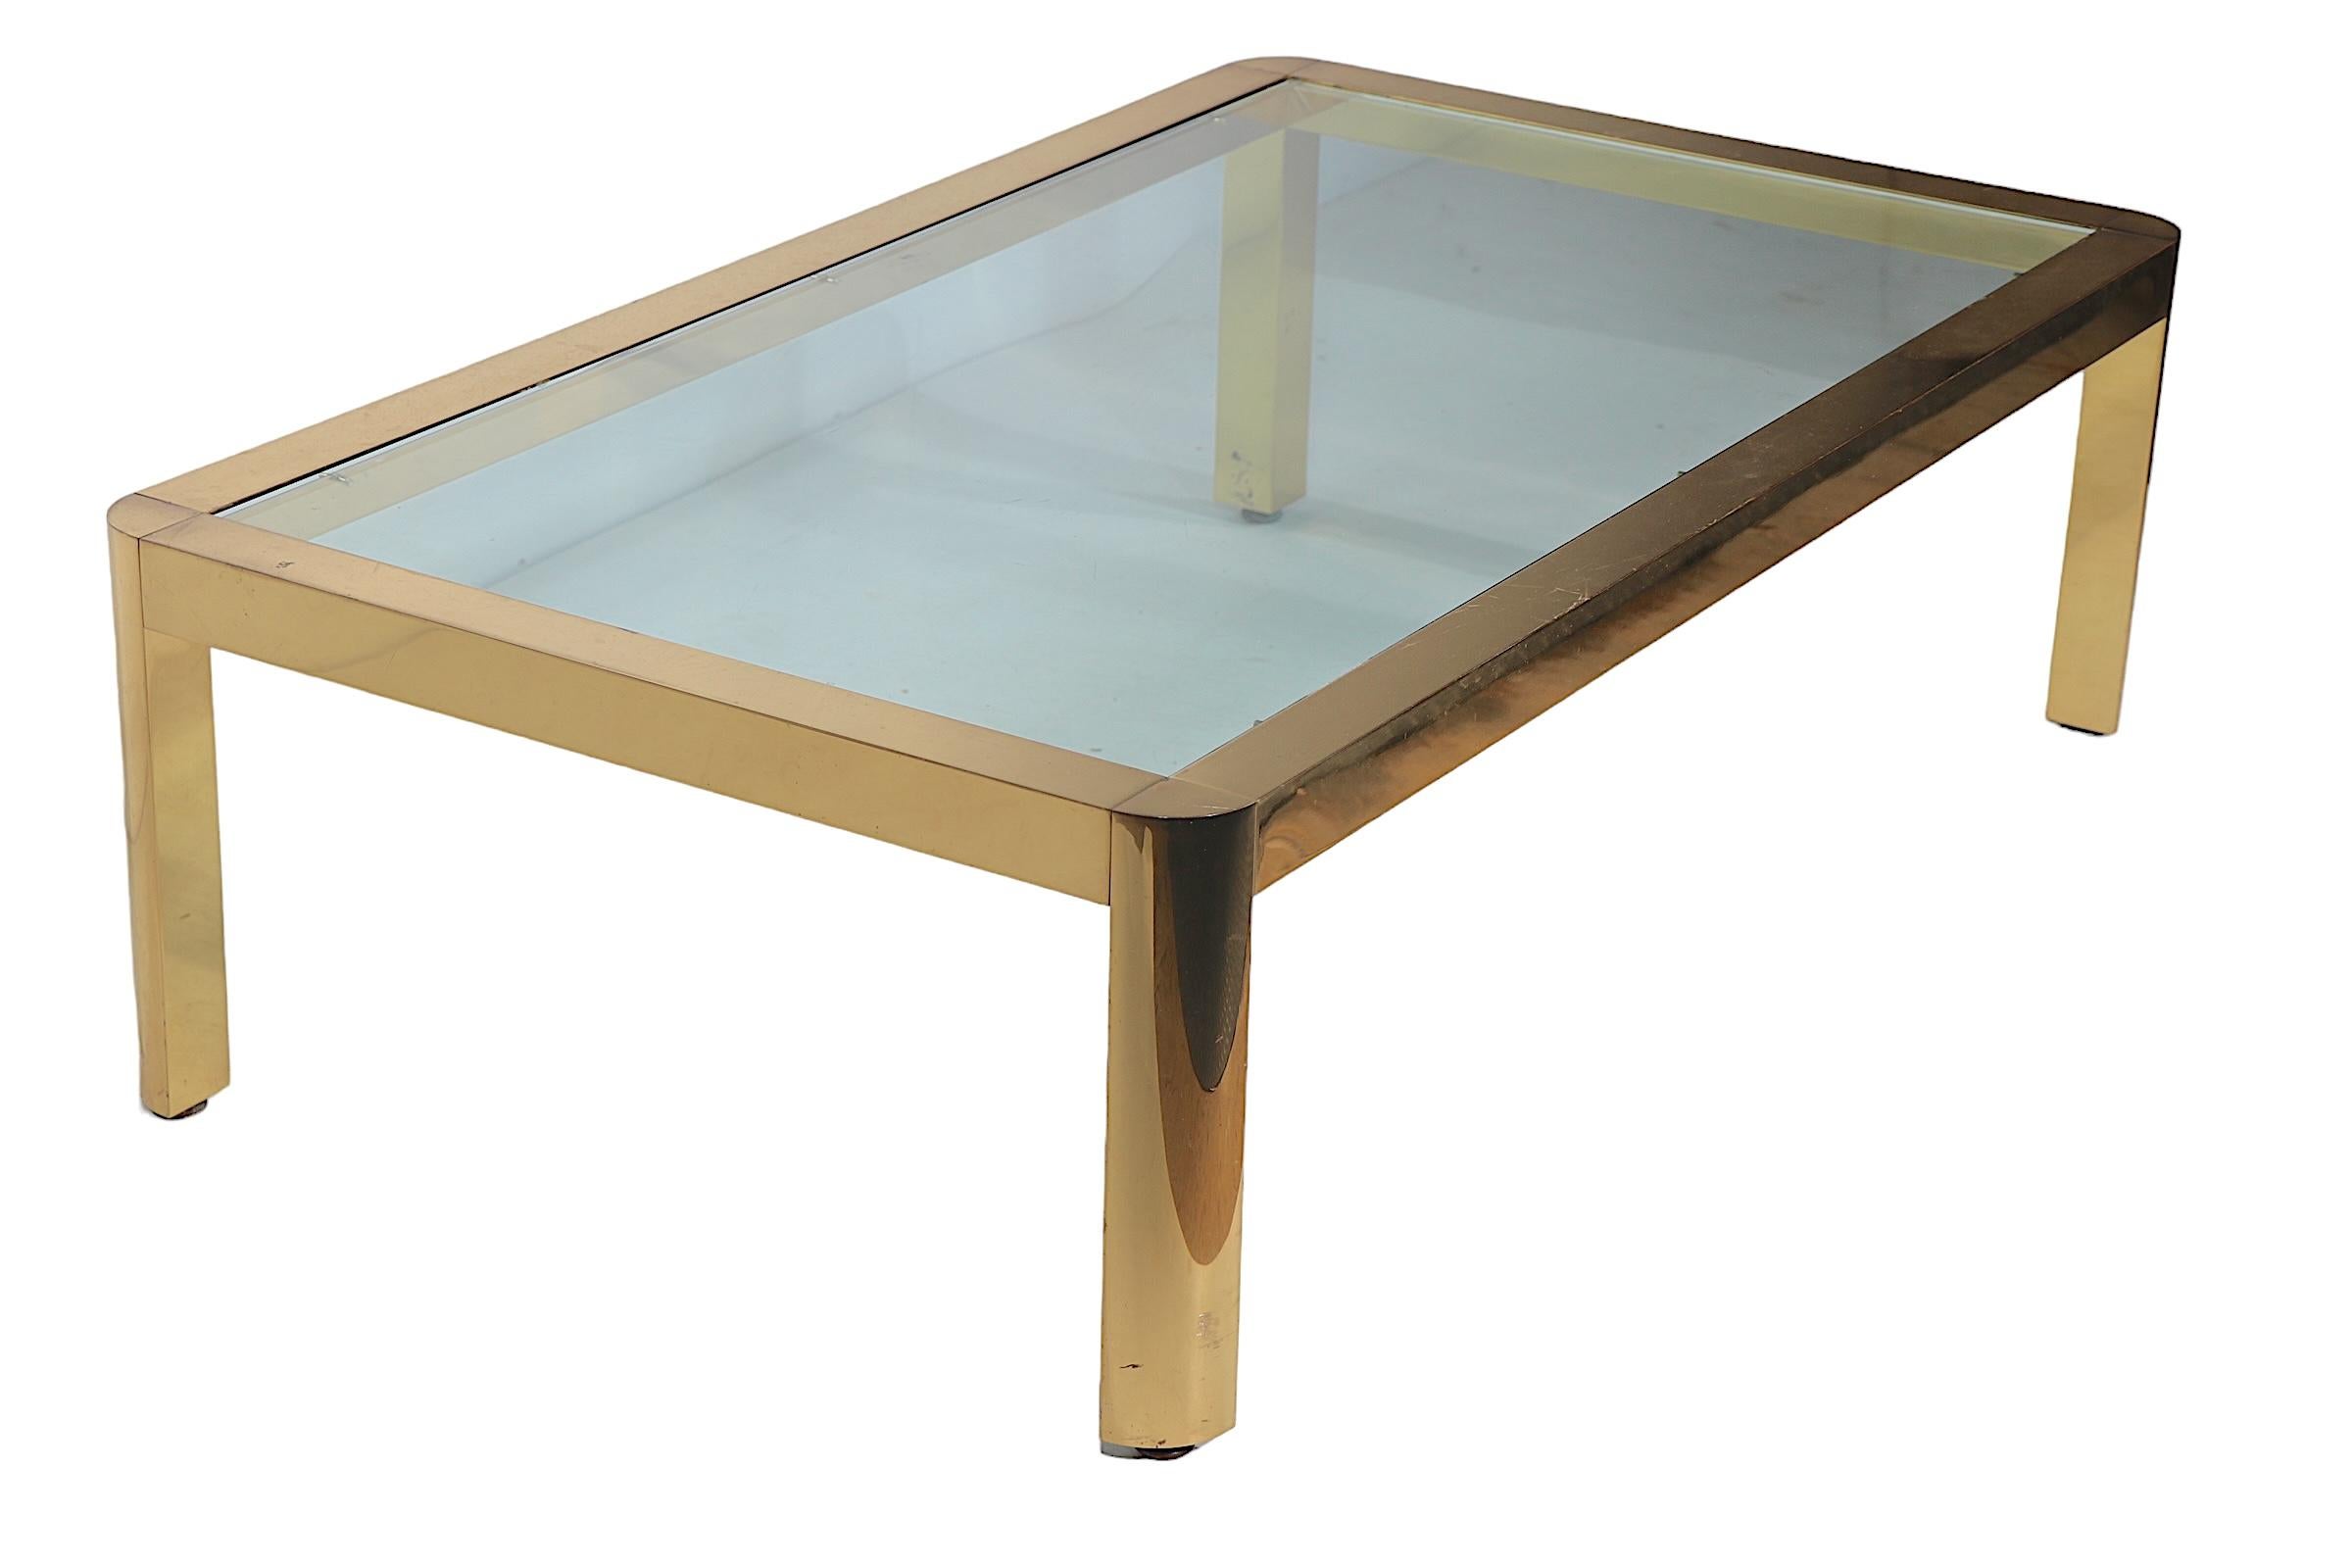 Voguish, chic, and sophisticated brass and glass coffee table having a bright brass frame of squared stock, with a thick tempered glass insert top. The table is in very fine, original, clean and ready to use condition, showing only light cosmetic